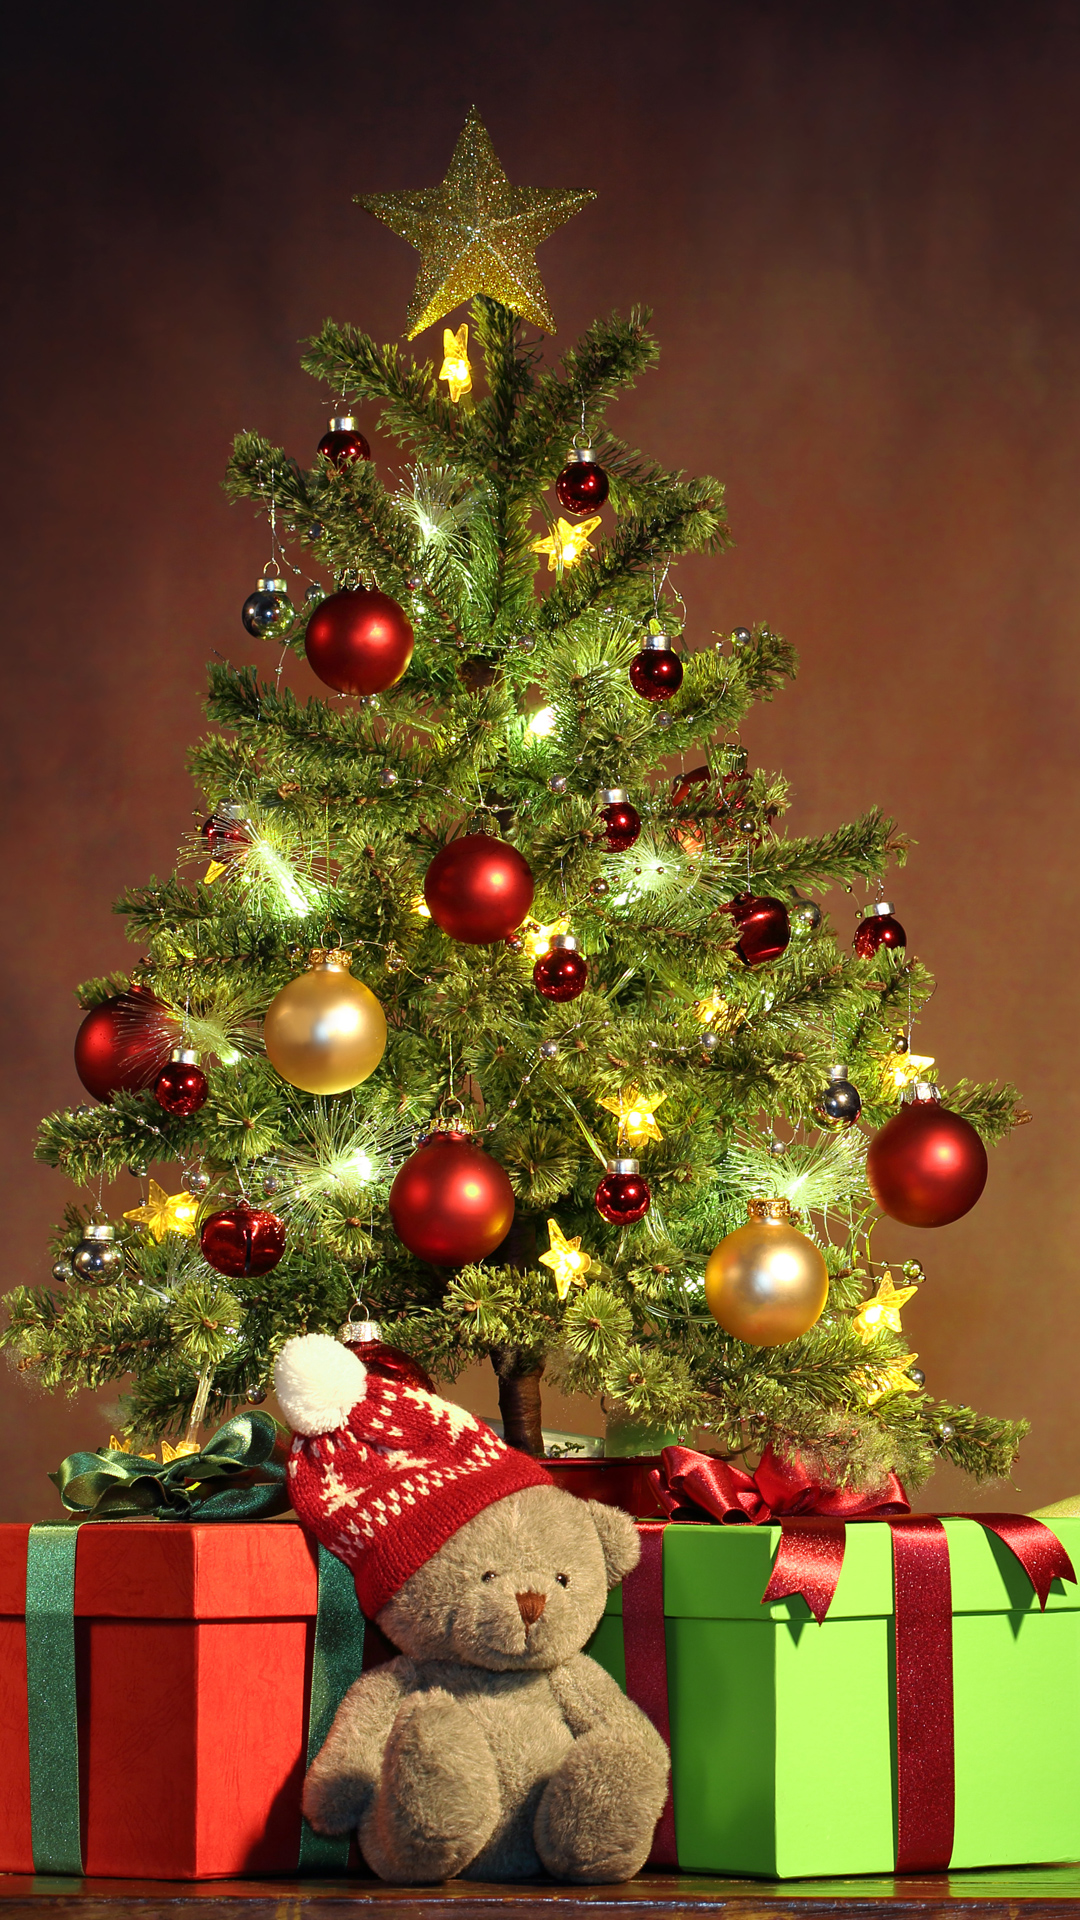 Christmas Tree iPhone 6S Plus Wallpaper | Gallery Yopriceville - High